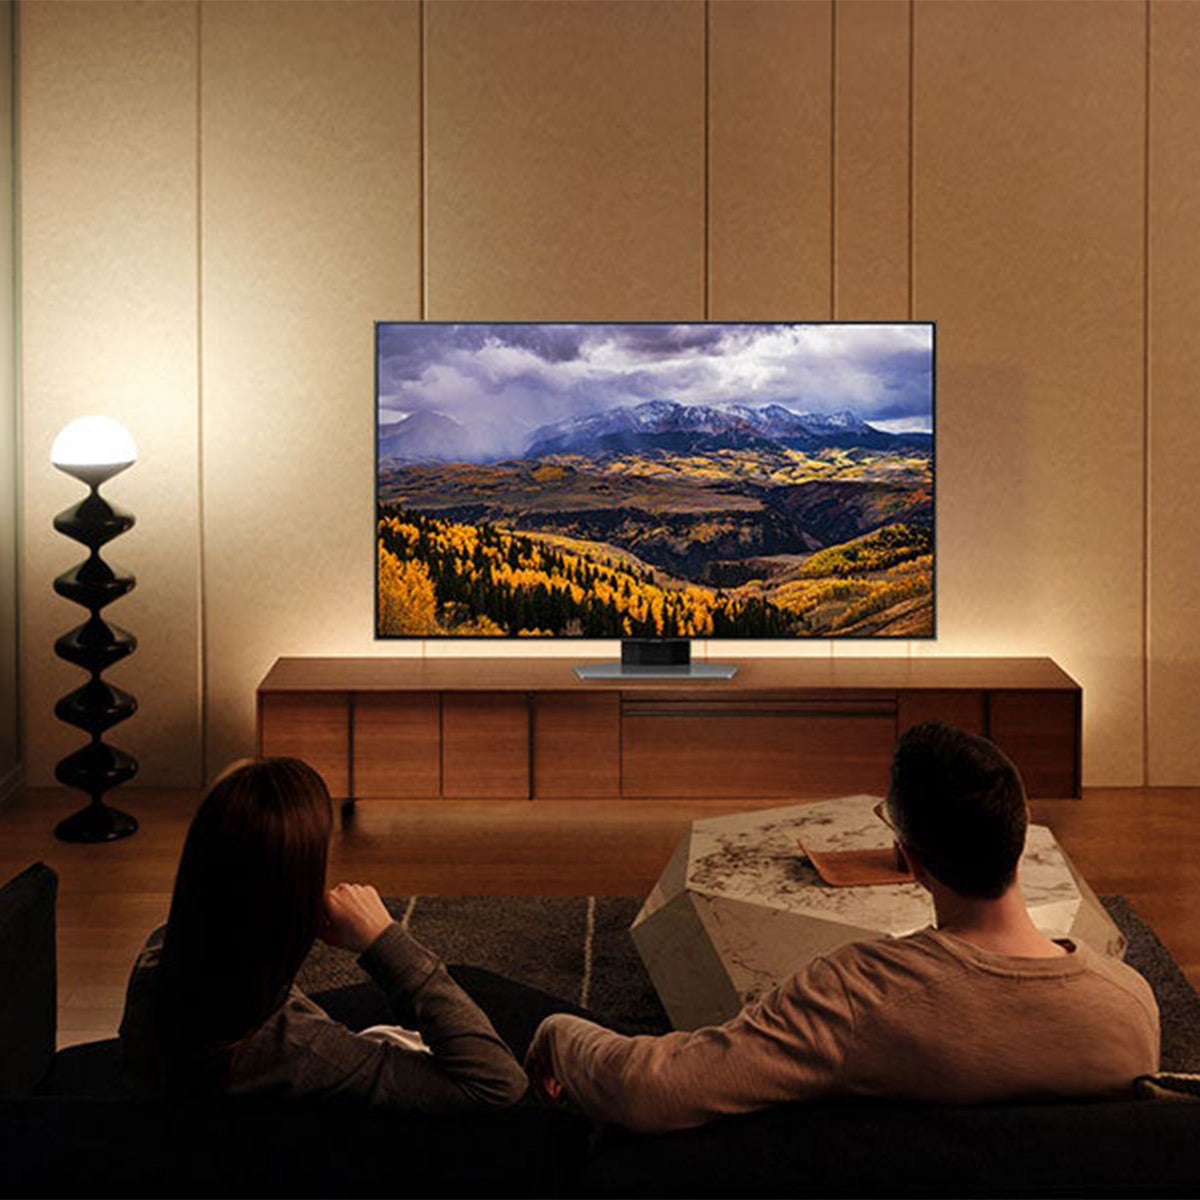 Samsung QN55Q80CA 55" QLED 4K Smart TV with Quantum HDR+, Dolby Atmos, Object Tracking Sound, & 4K Upscaling (2023)